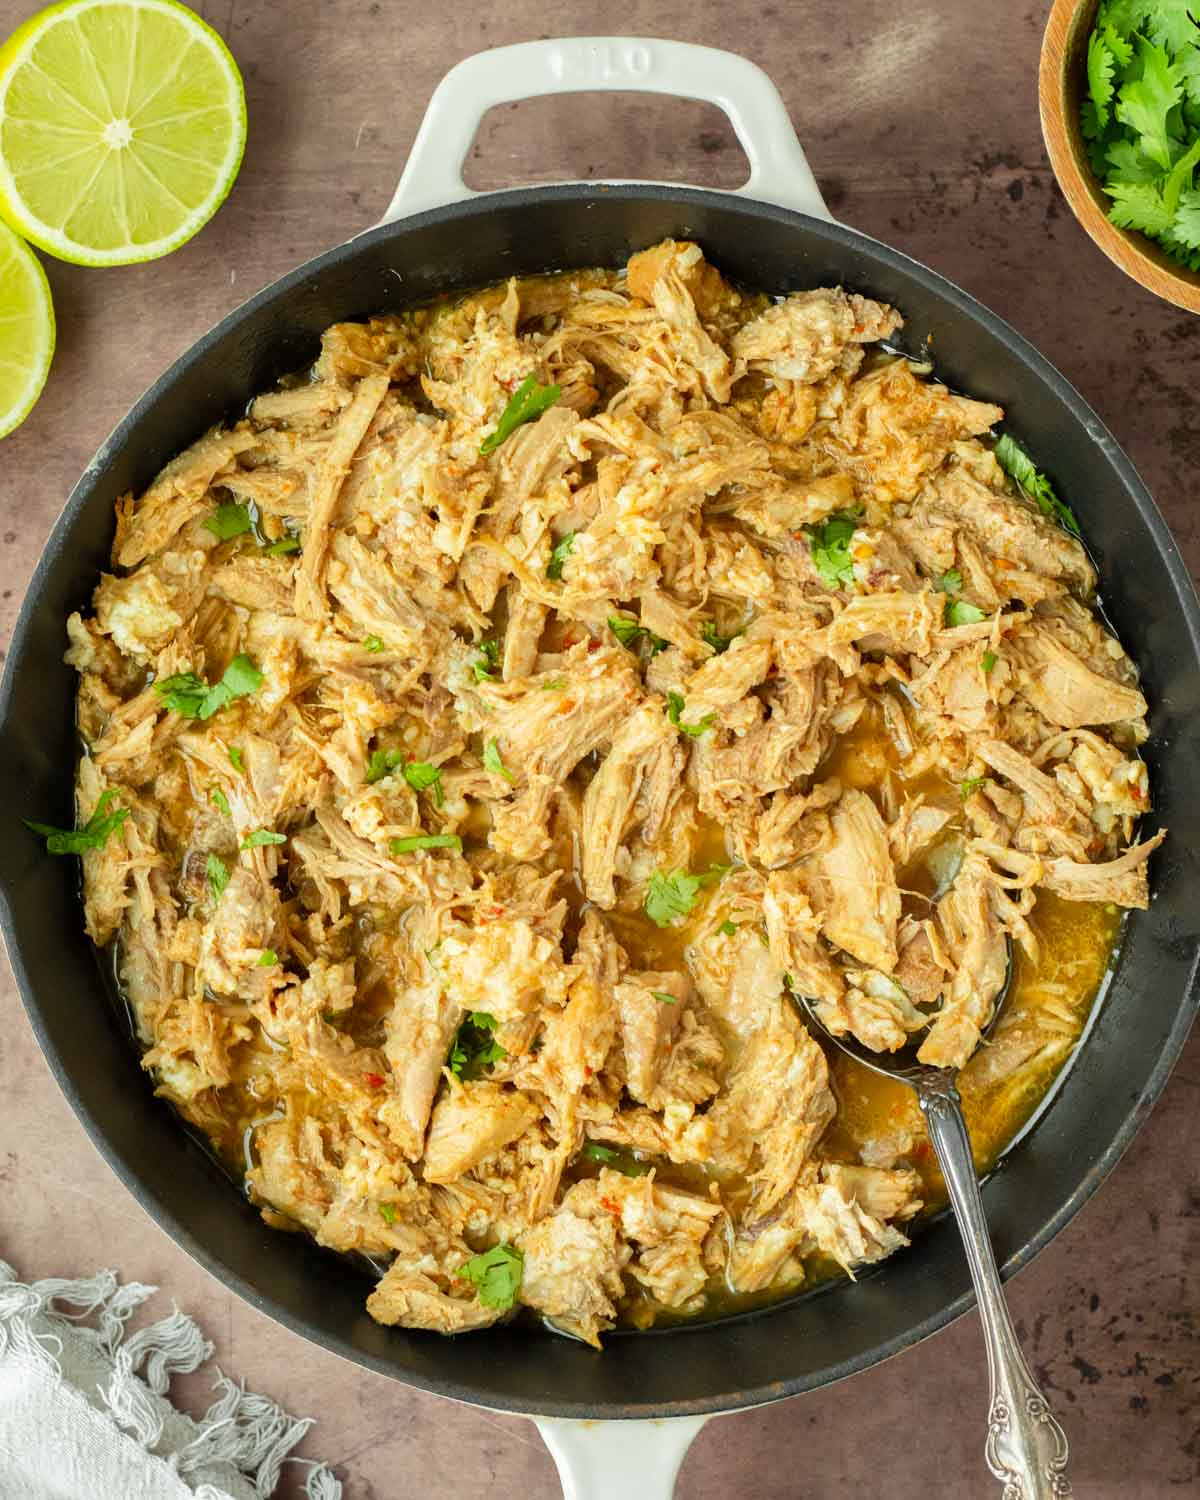 These crockpot pork carnitas are a flavorful and easy crockpot recipe made with pork loin generously seasoned and slow cooked in fresh orange and lime juice to make a flavorful shredded meat perfect for tacos, enchiladas and more.